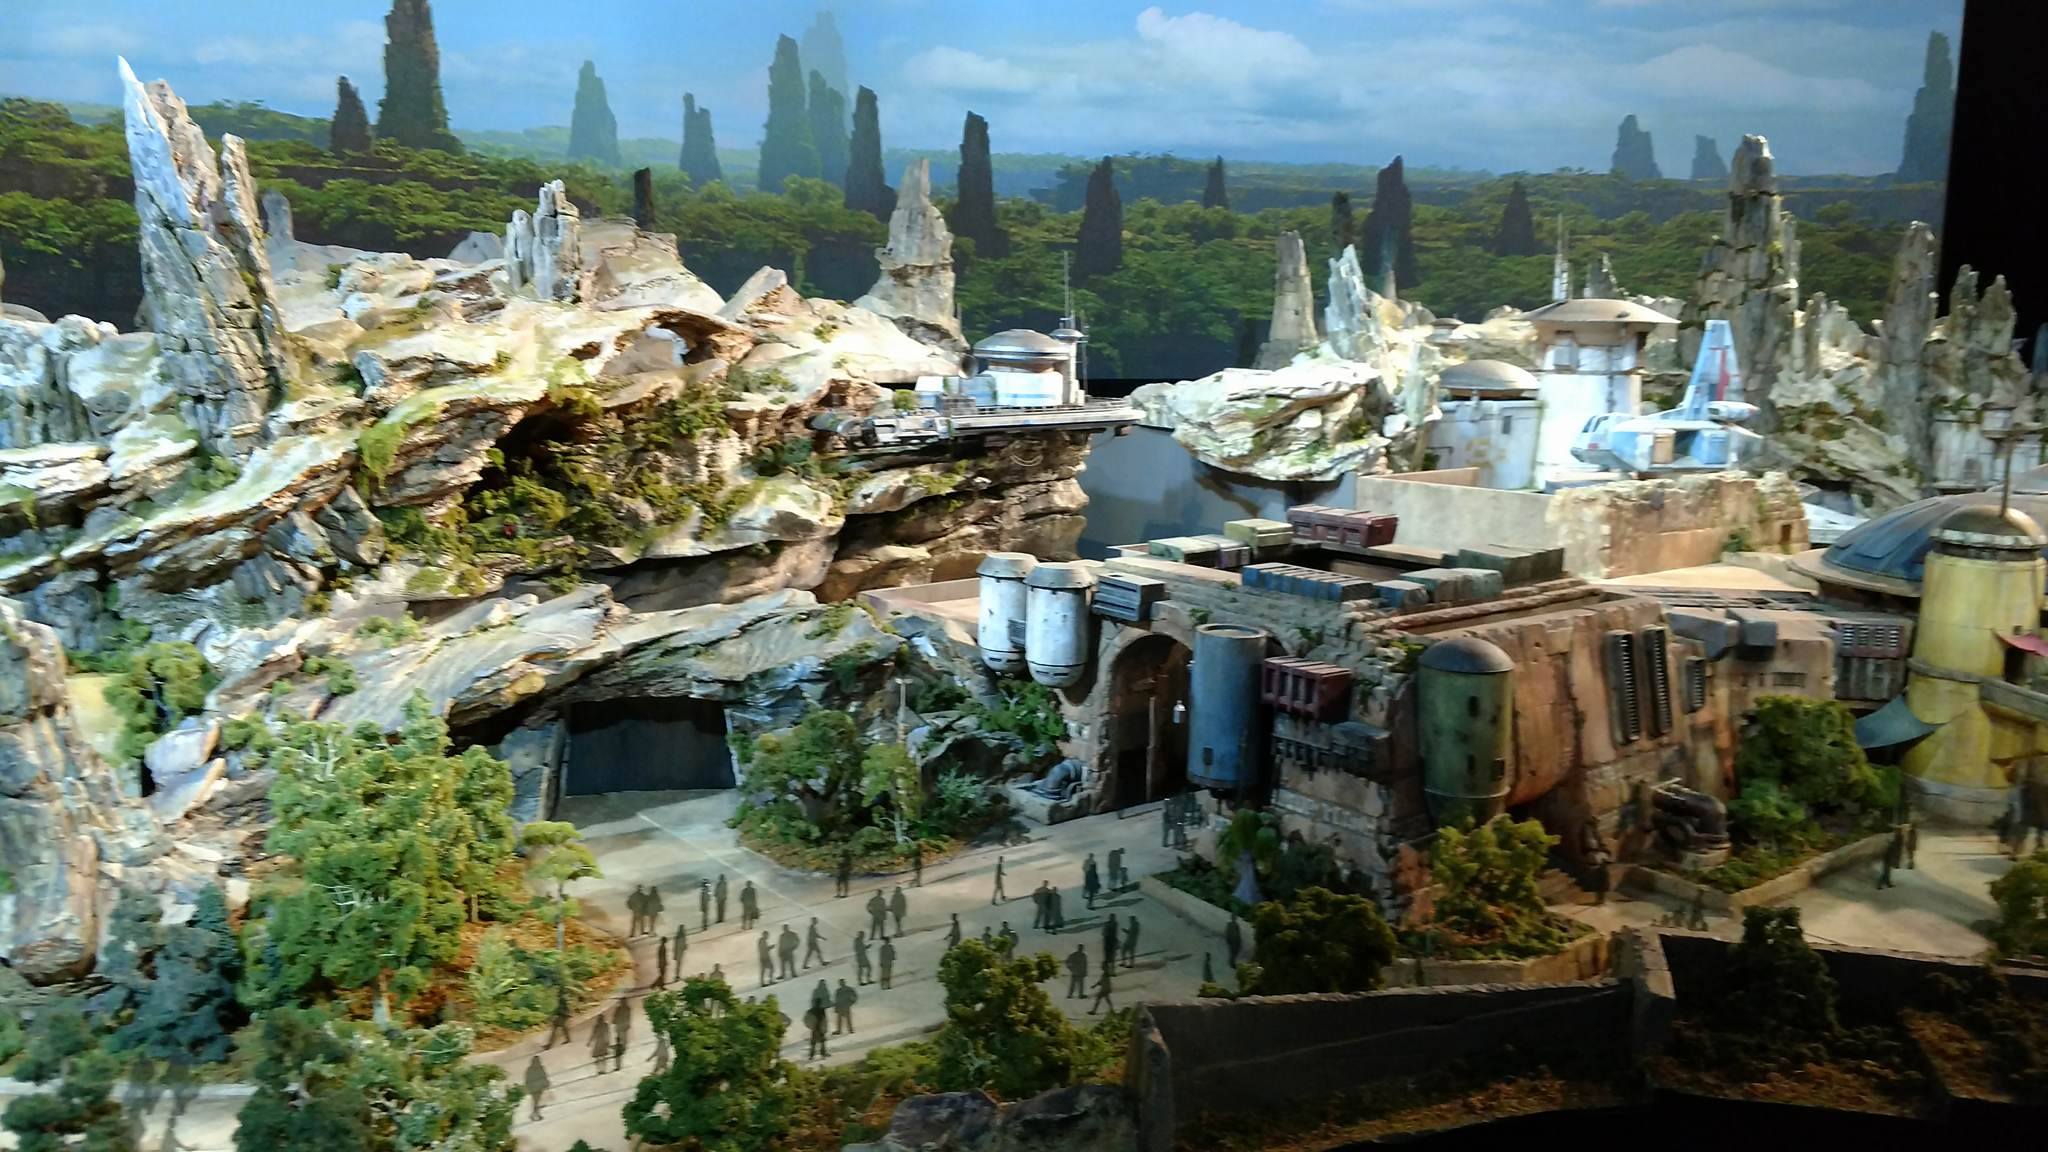 A First Look at Star Wars Land From the D23 Expo